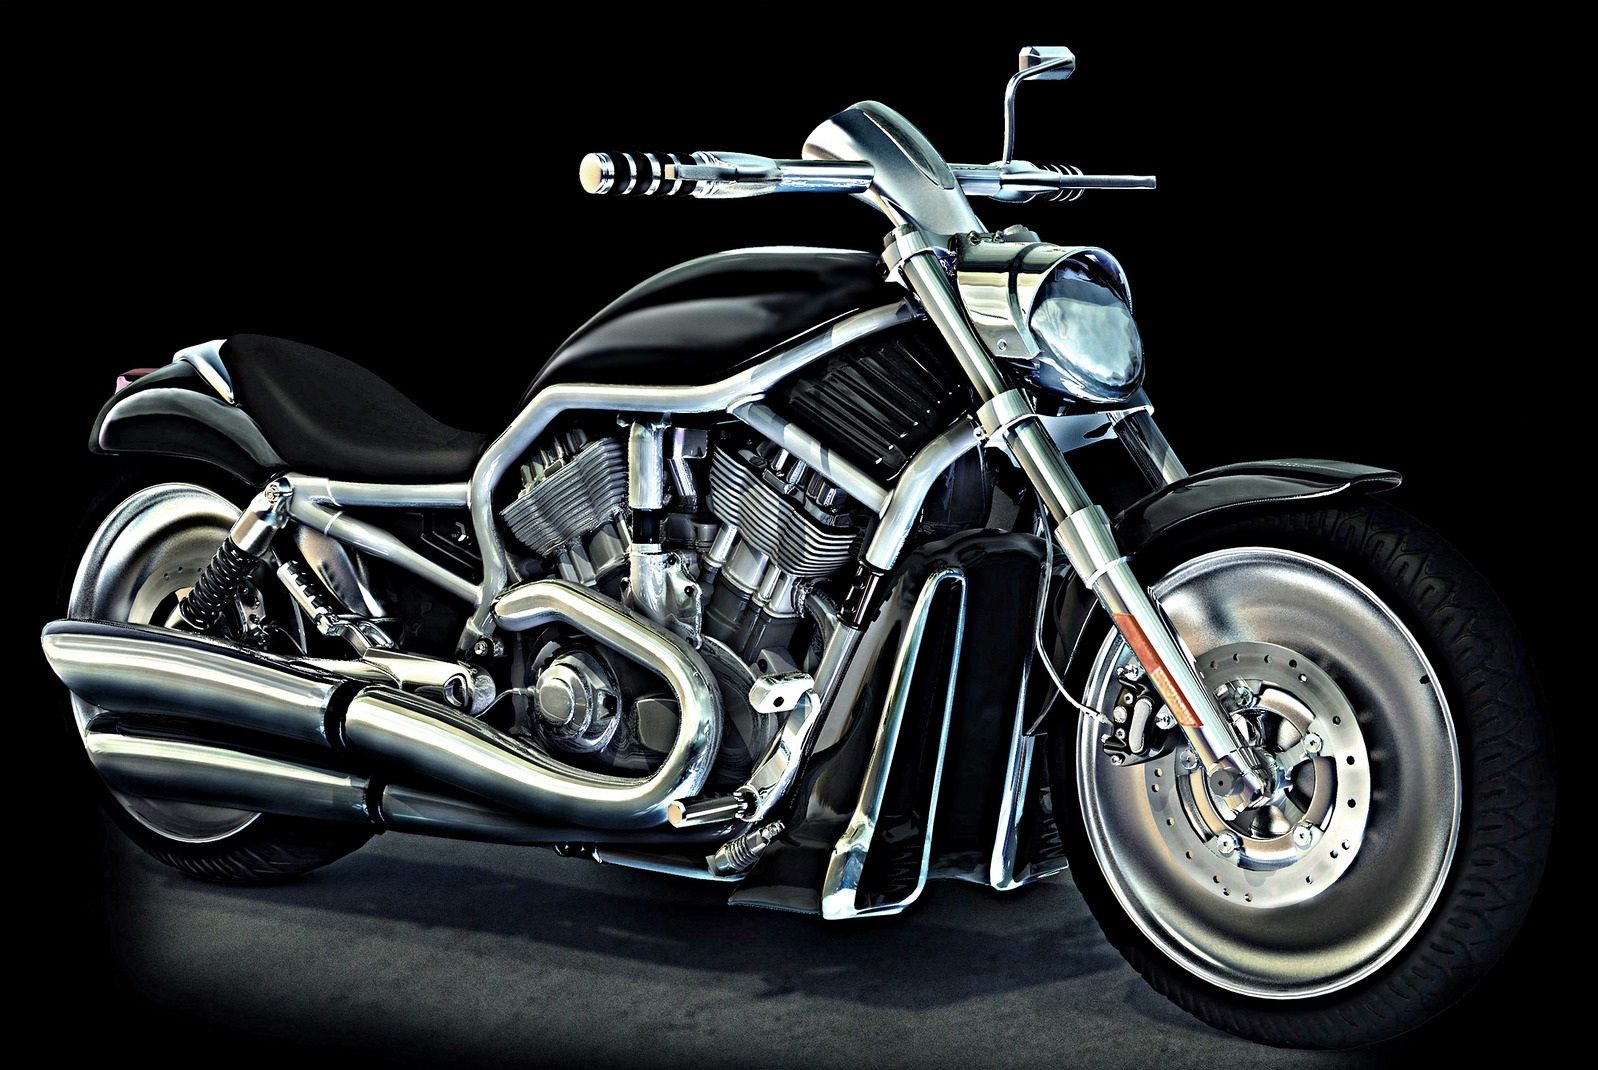 Bike Harley Davidson Wallpaper Best Review and Pictures 2016